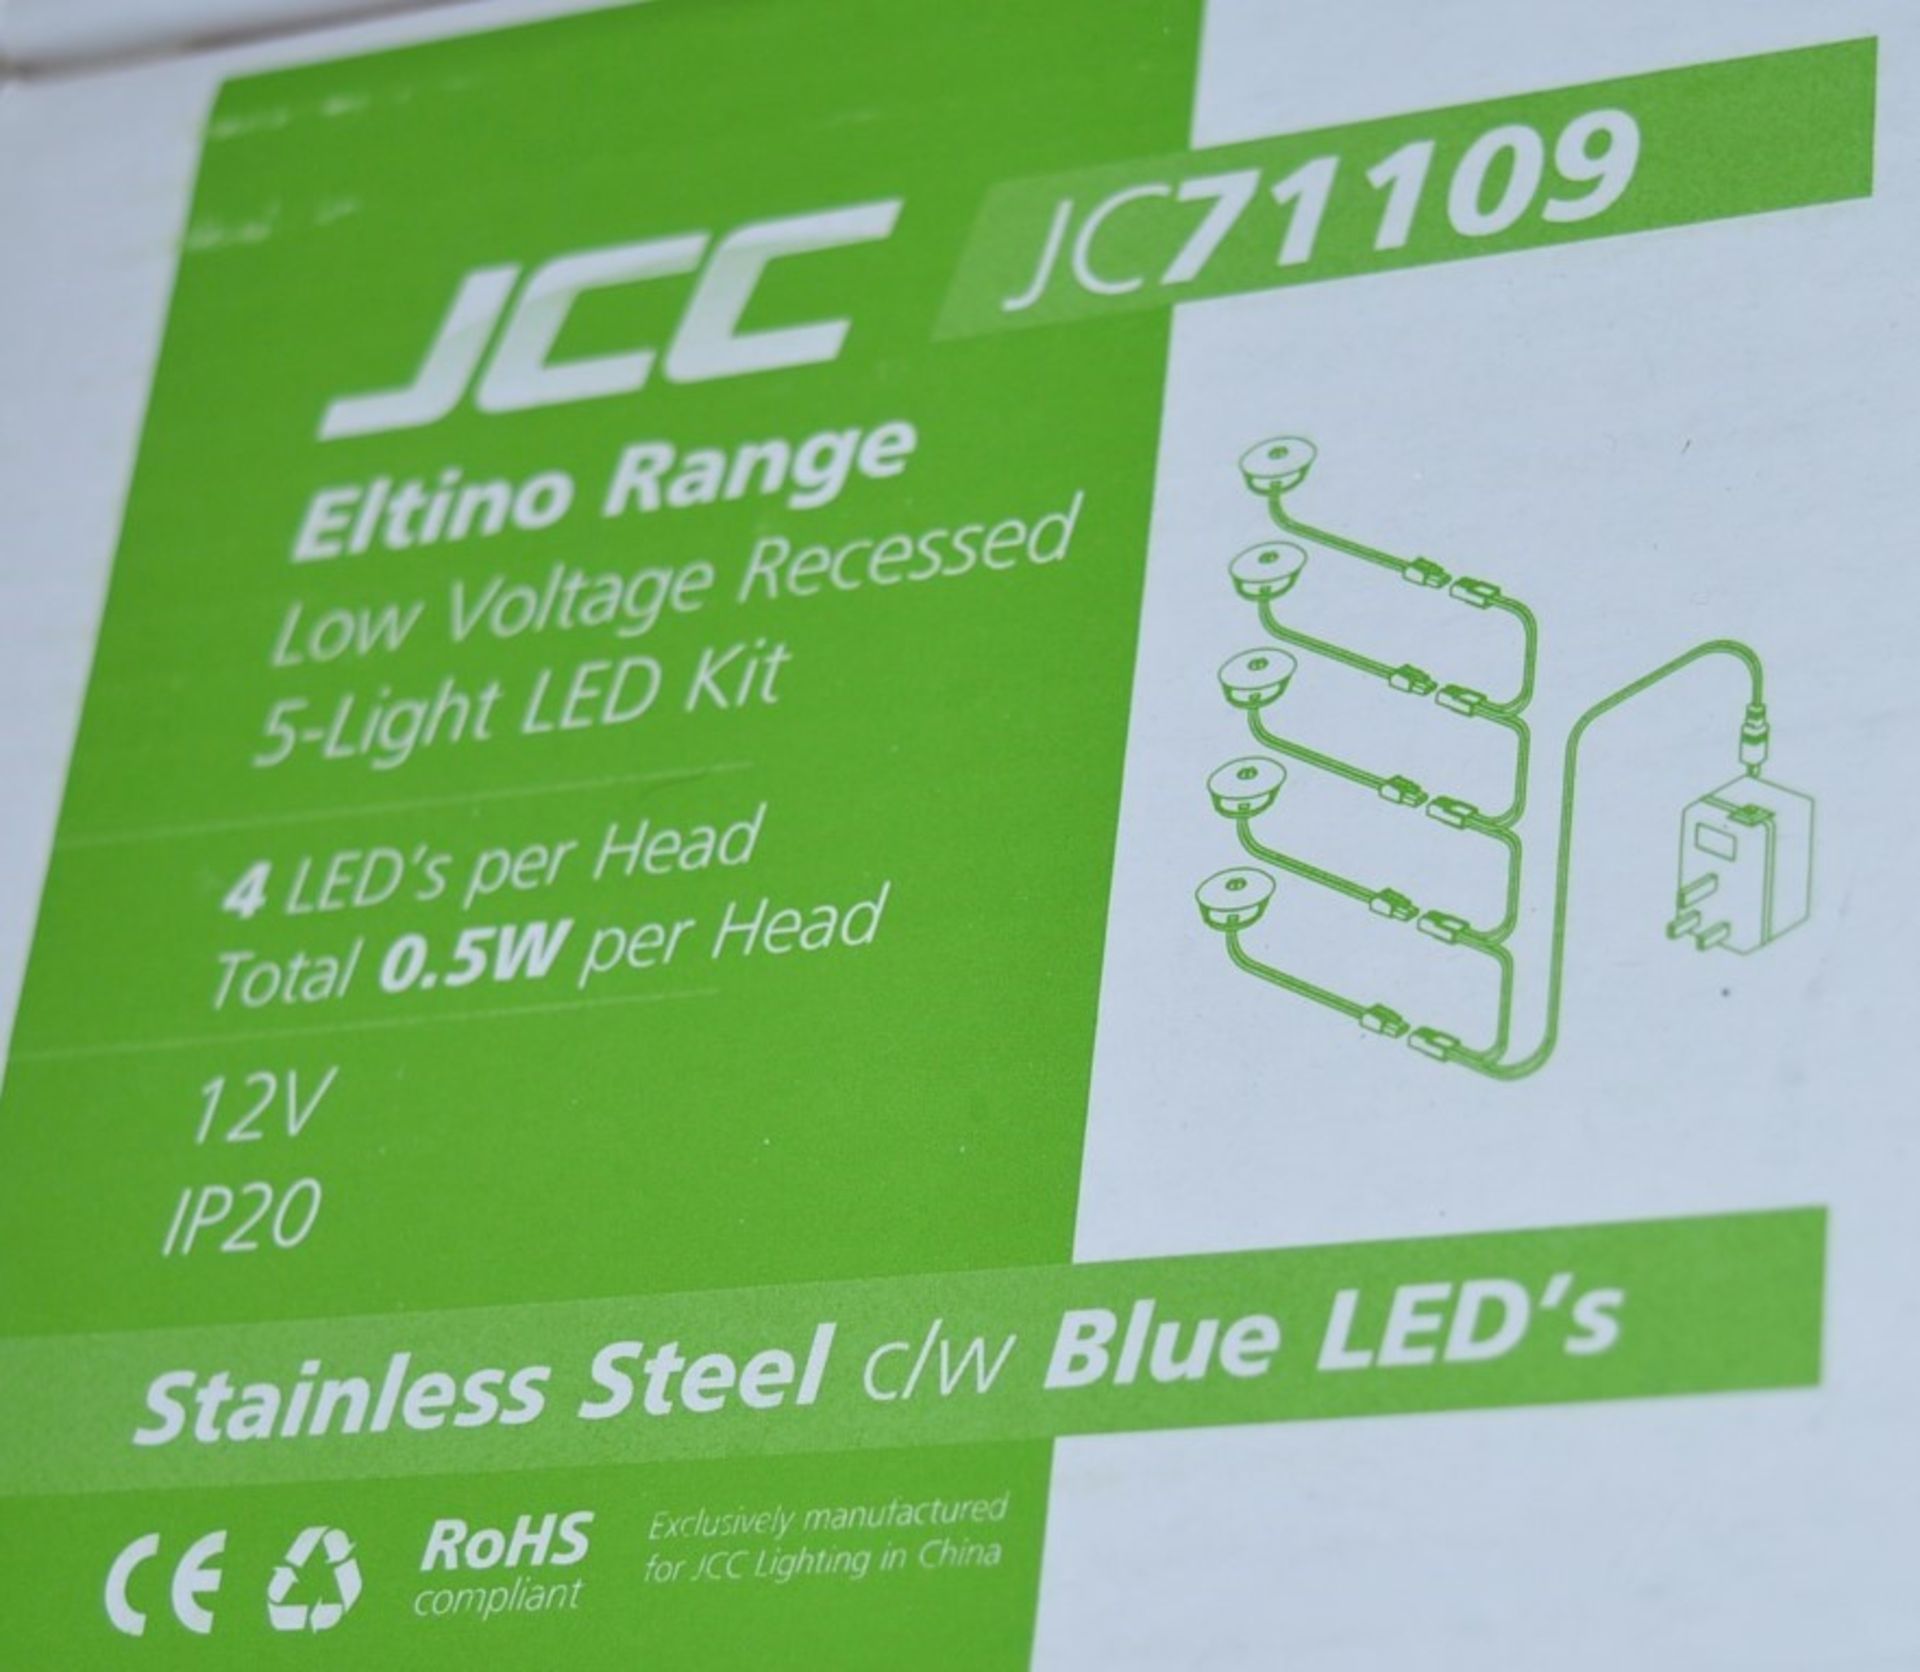 4 x JCC Lighting ELTINO Indoor Blue LED Floor or Wall Lighting Kits - Lot Includes Four Sets - Ideal - Image 4 of 5